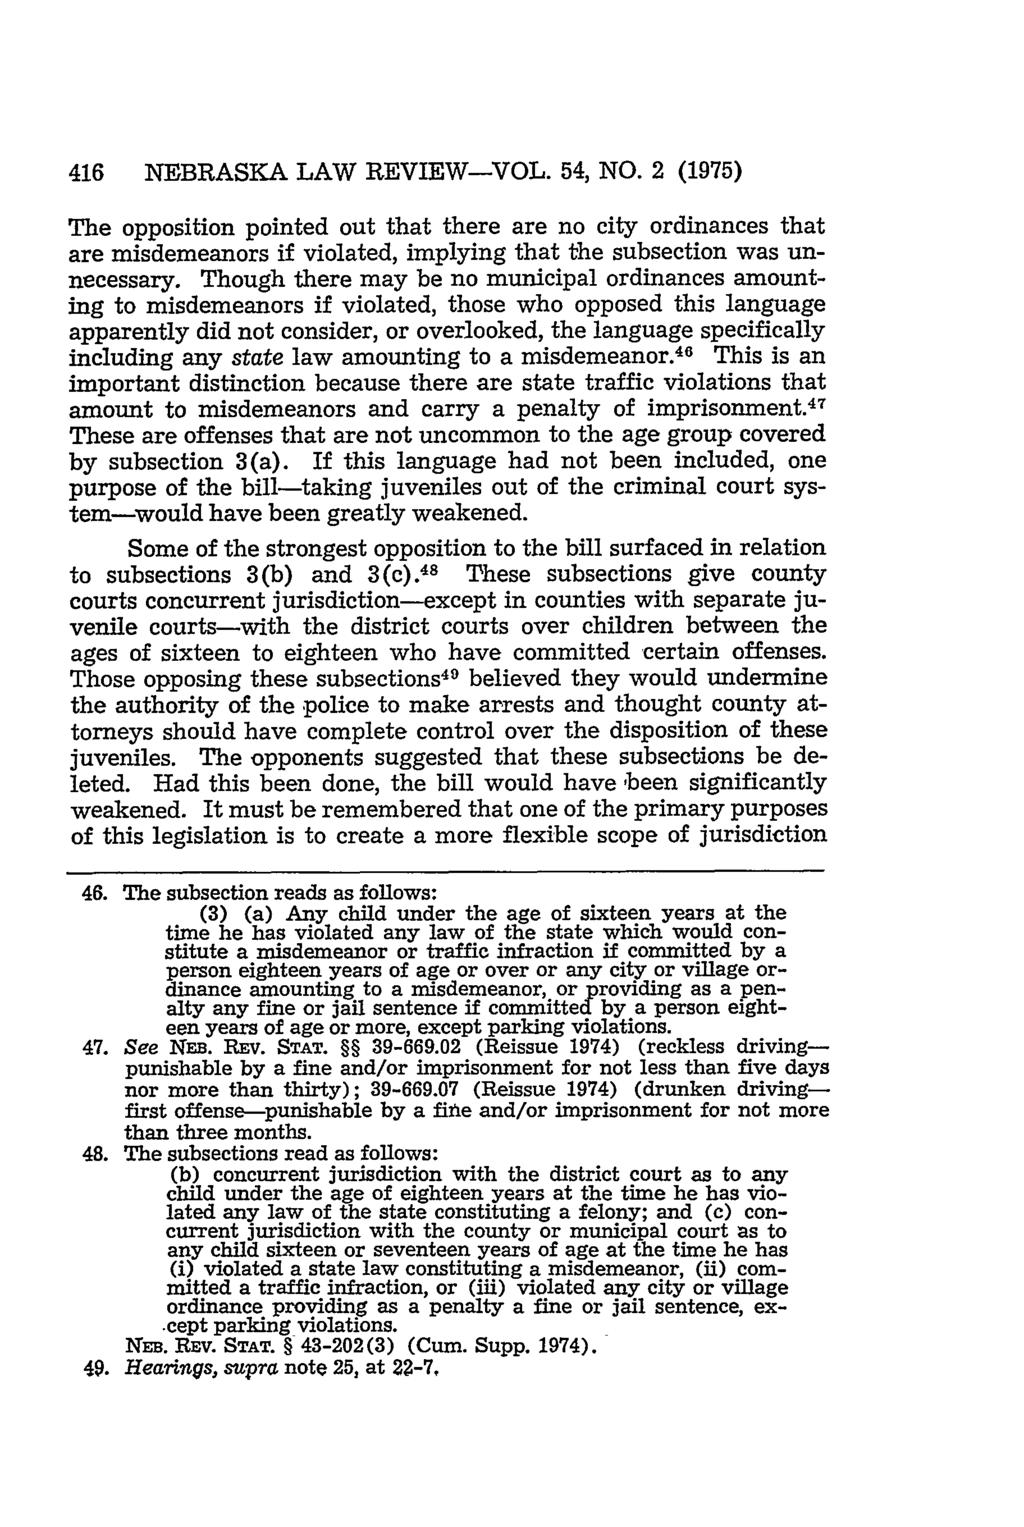 416 NEBRASKA LAW REVIEW-VOL. 54, NO. 2 (1975) The opposition pointed out that there are no city ordinances that are misdemeanors if violated, implying that the subsection was unnecessary.